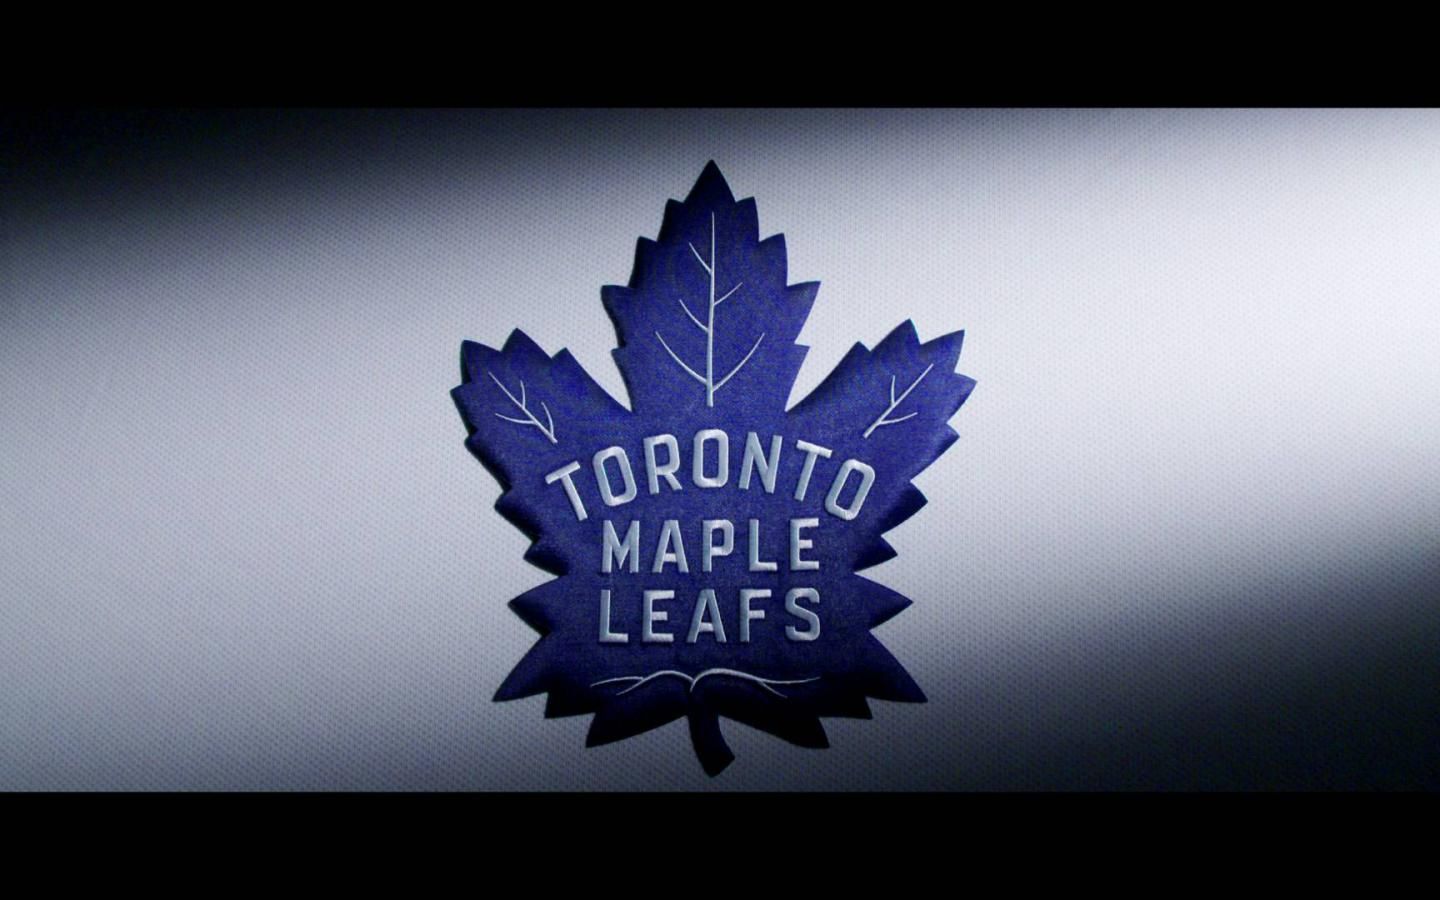 Toronto Maple Leafs wallpaper by Murillombom - Download on ZEDGE™ | 2789